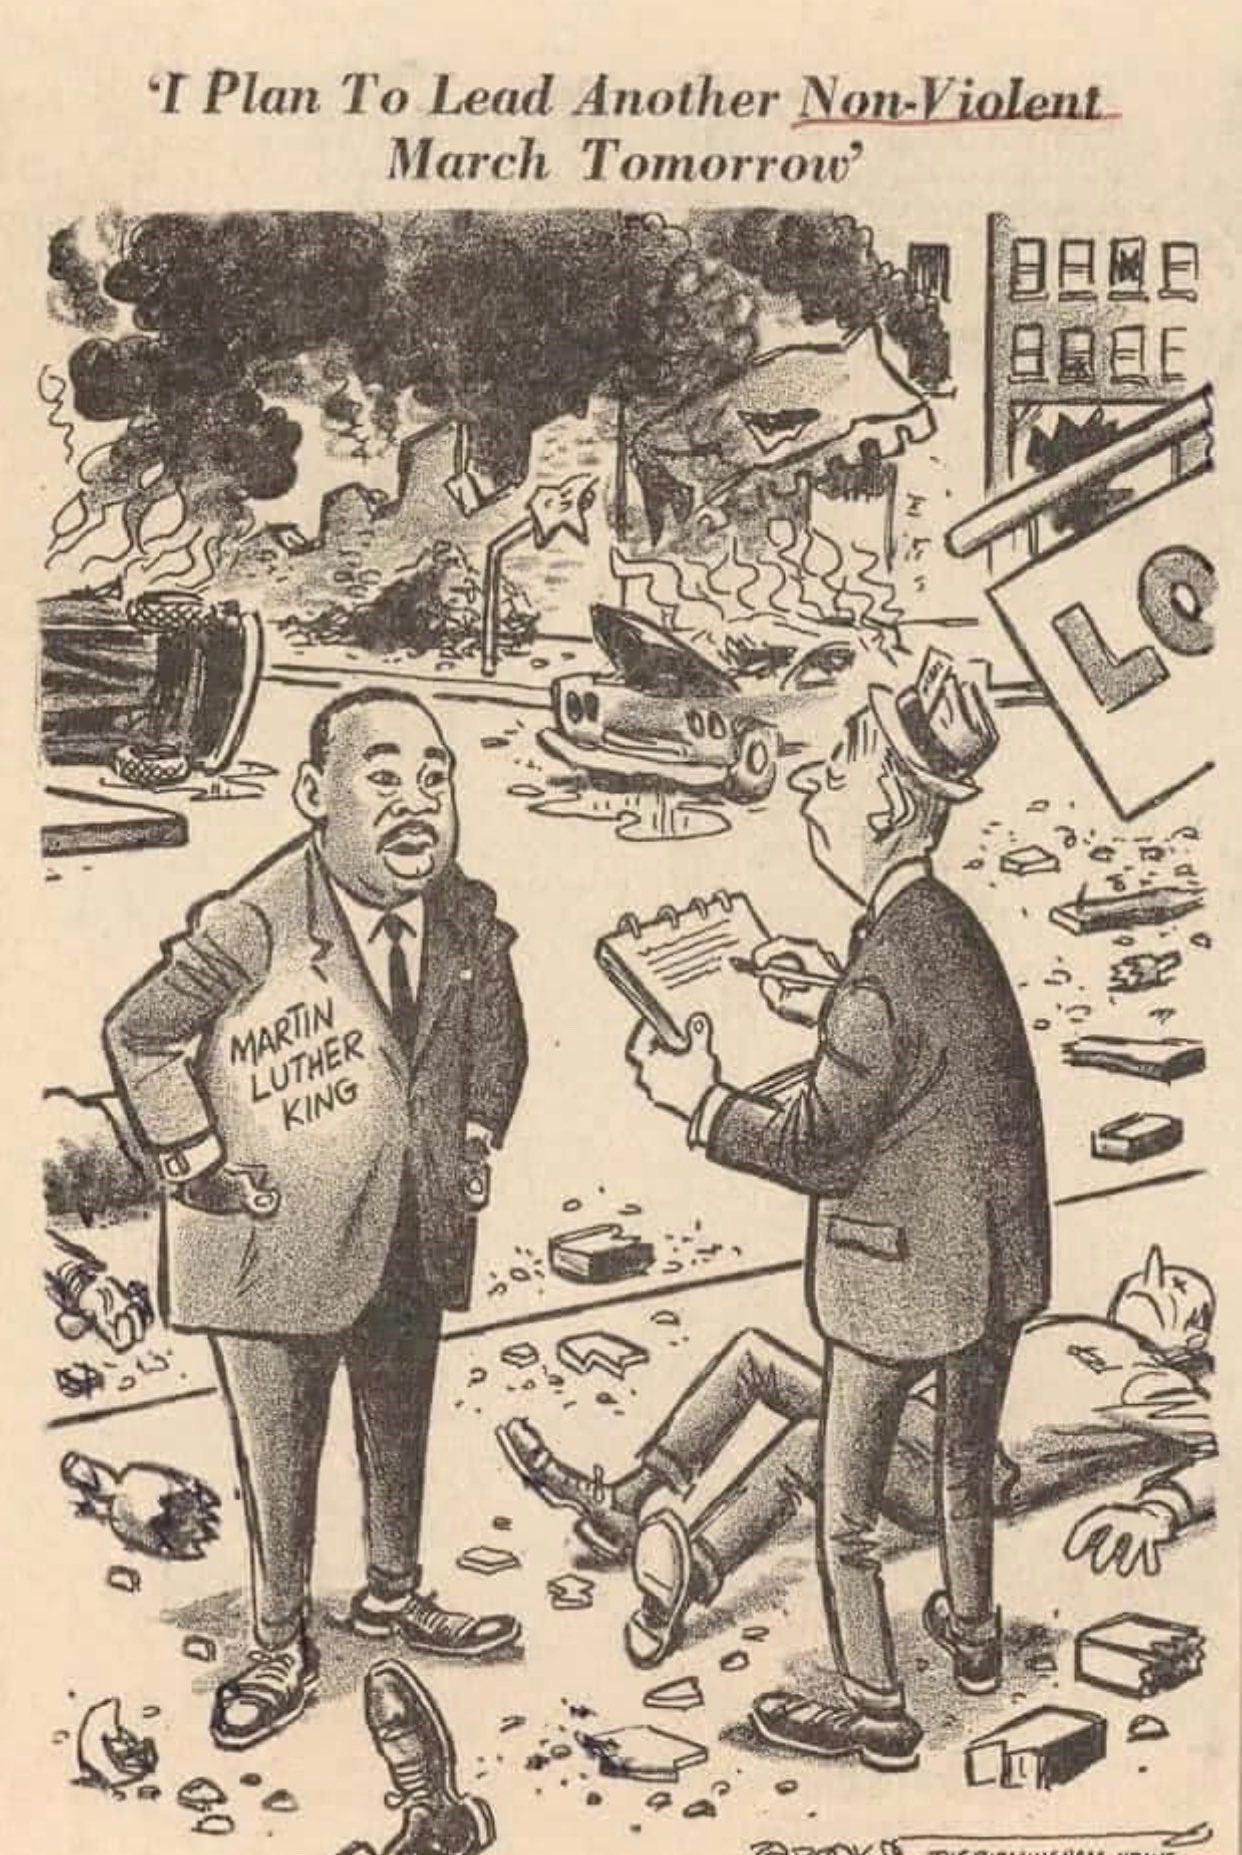 A cartoon in the newspapers mocking MLK and civil rights movement, 1967. The media has been attempting to make activism appear stupid and idiotic for decades